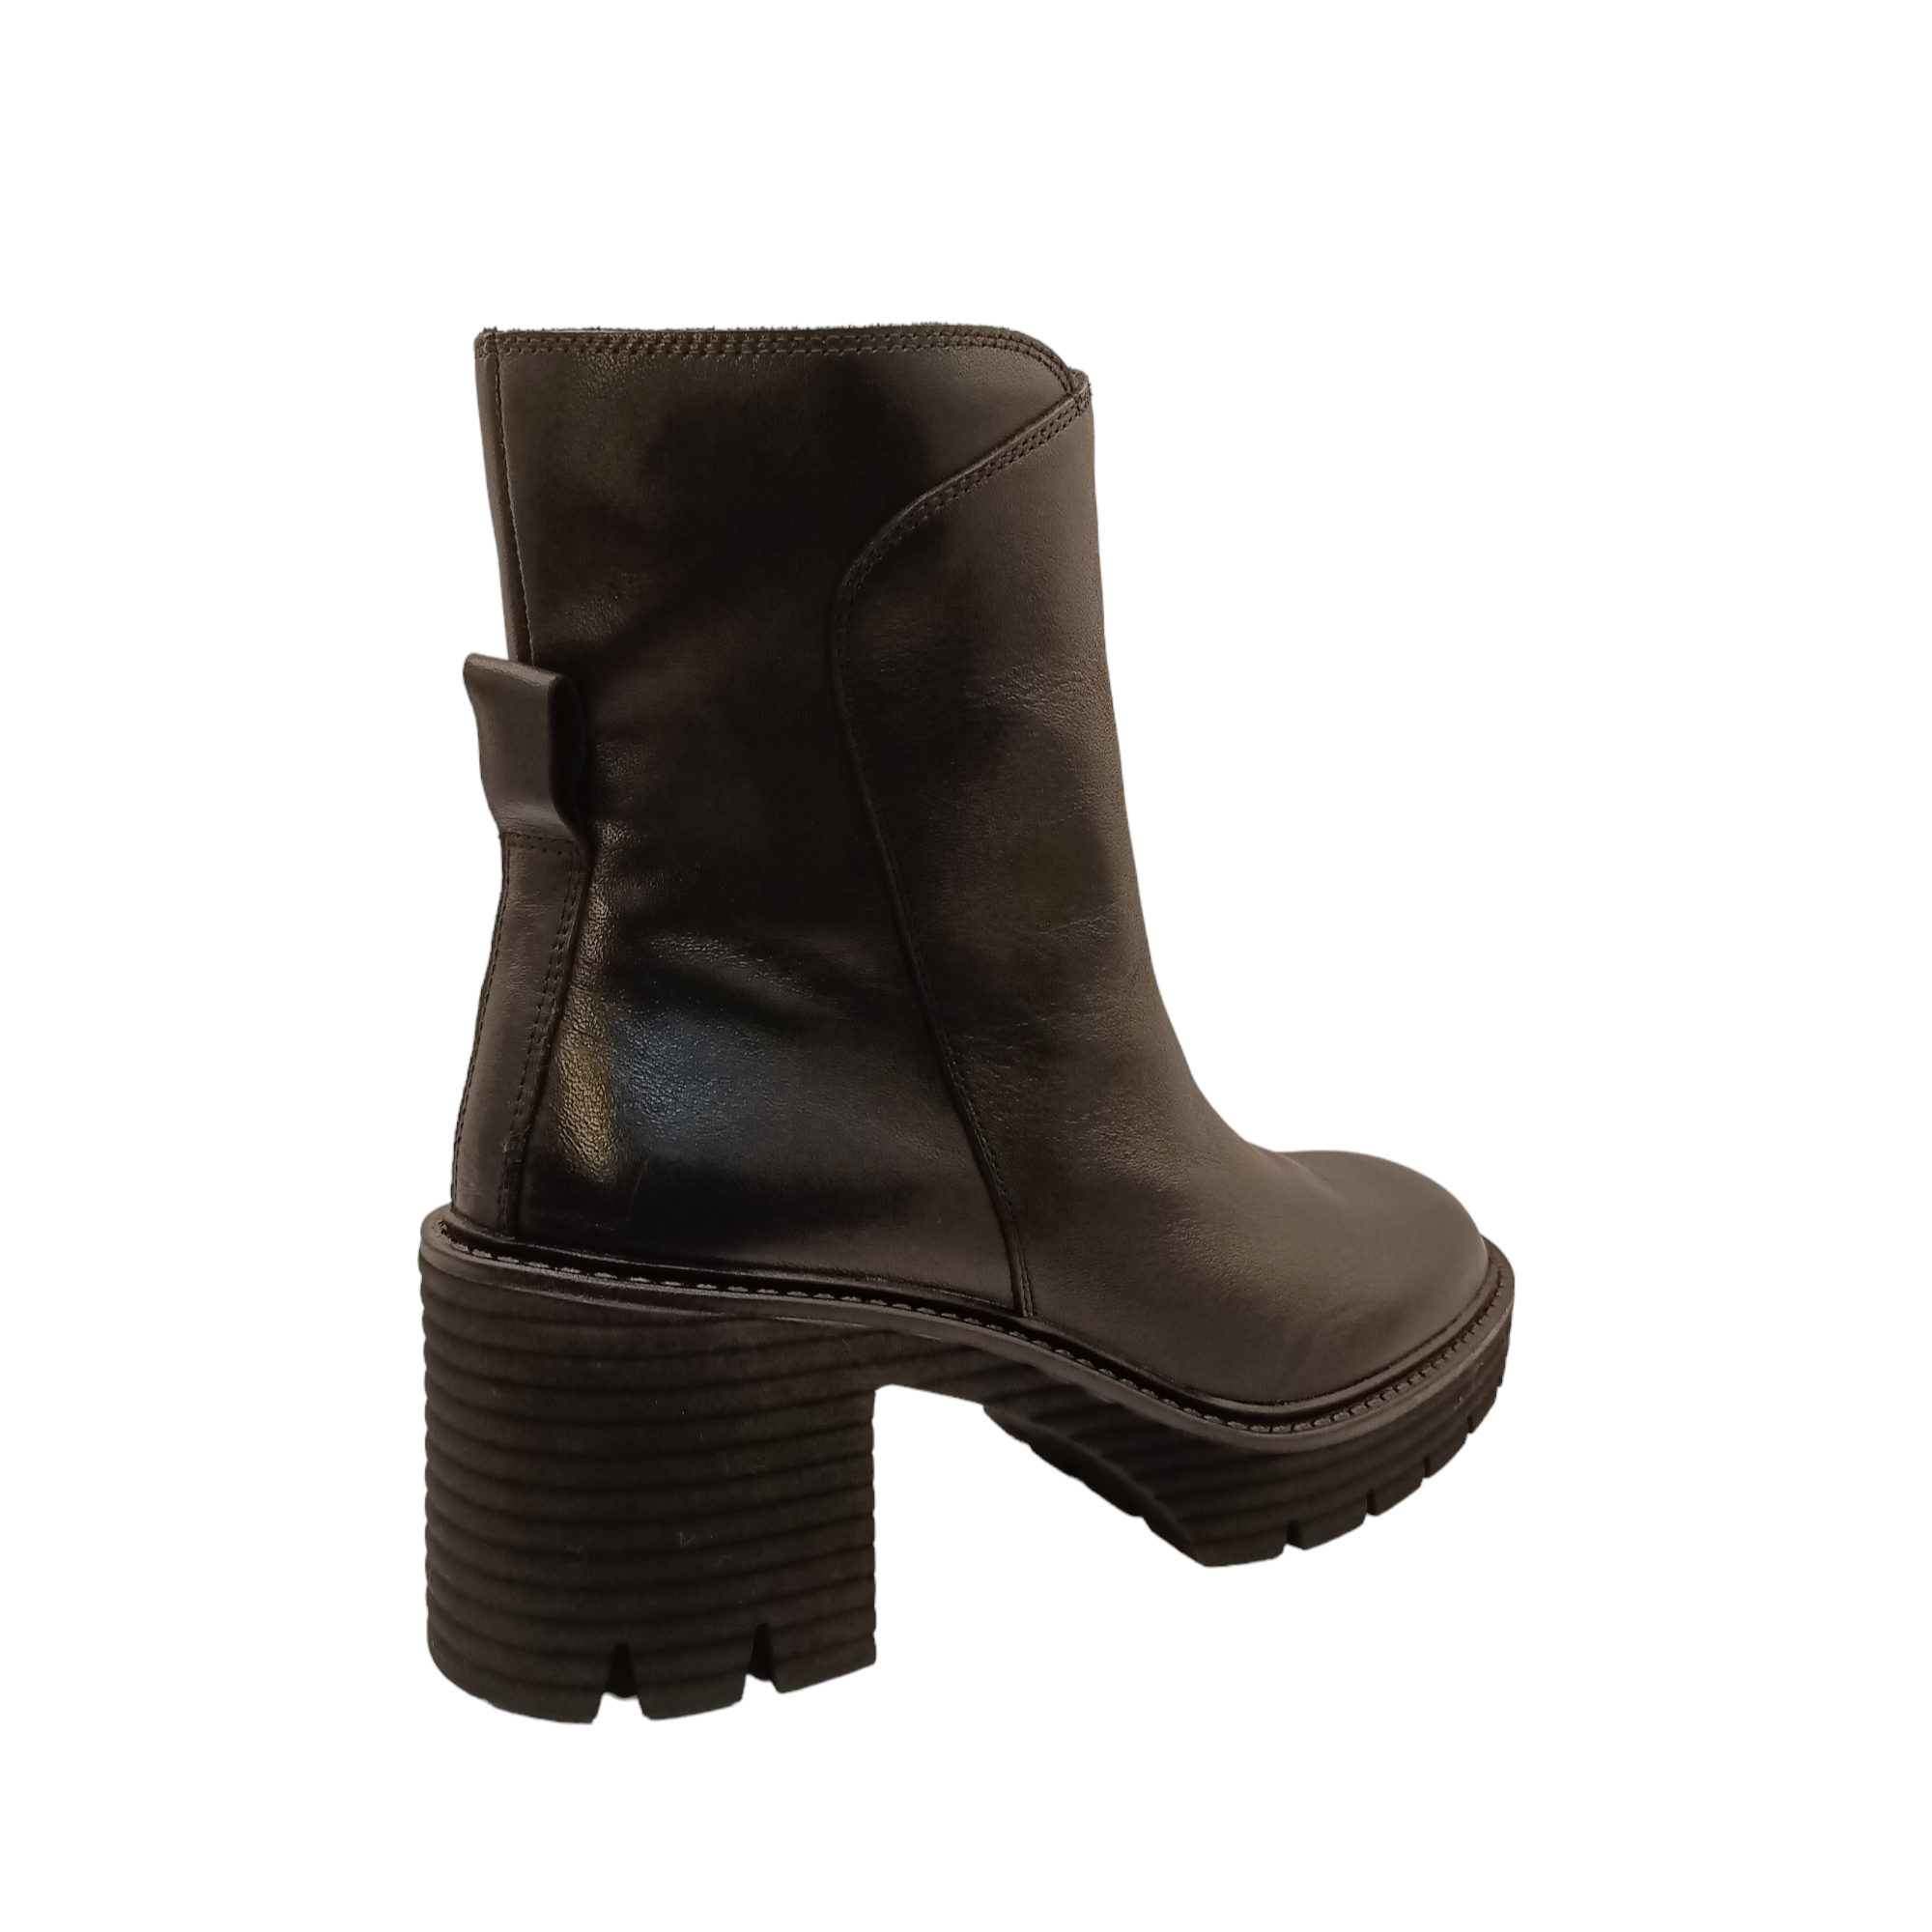 Shop Malini EOS - with shoe&amp;me - from EOS - Boots - Boot, Winter, Womens - [collection]